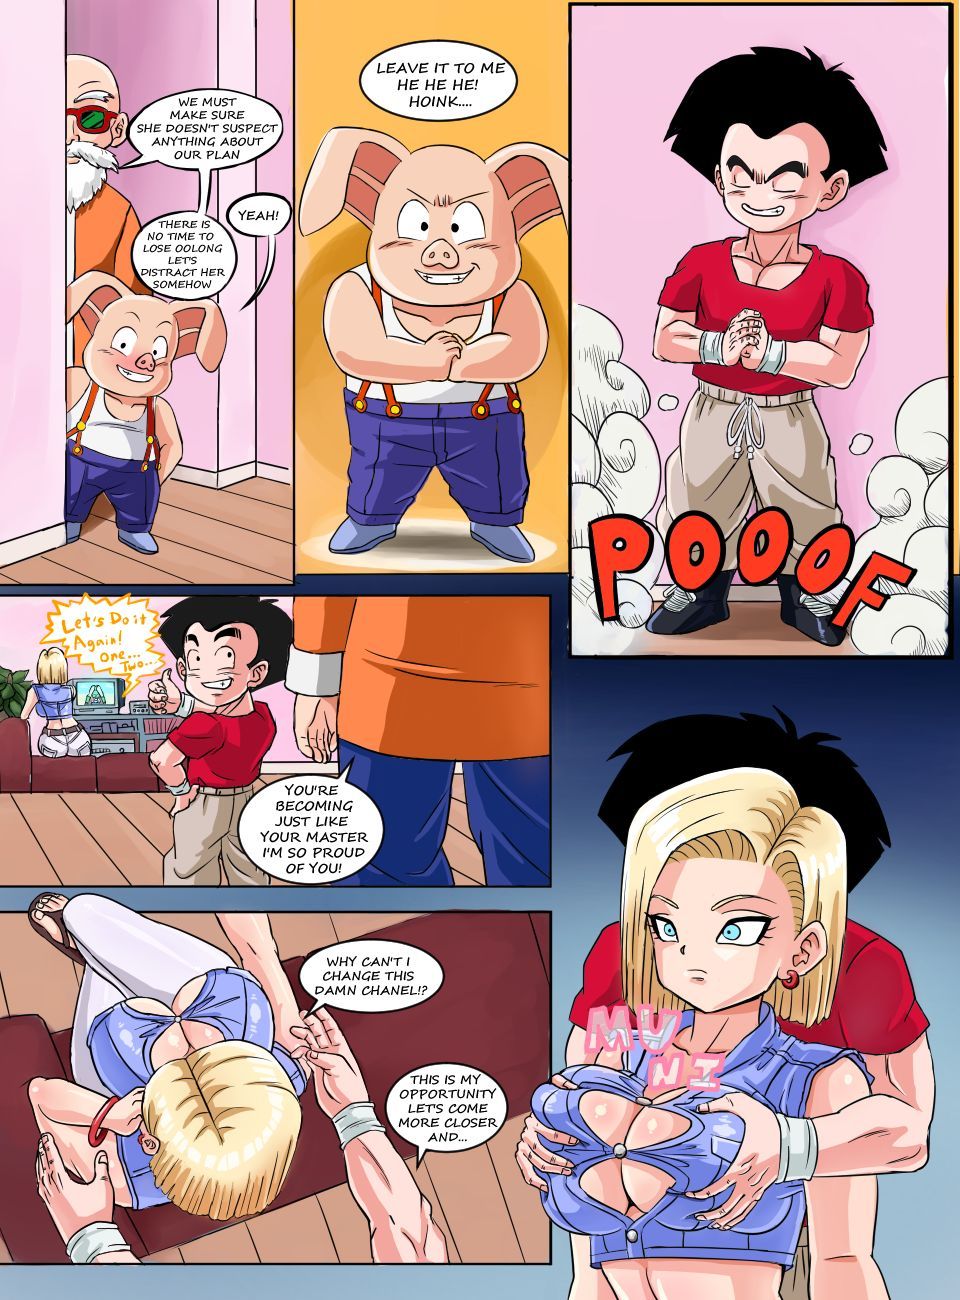 Android 18 - 27/64 - Hentai Image